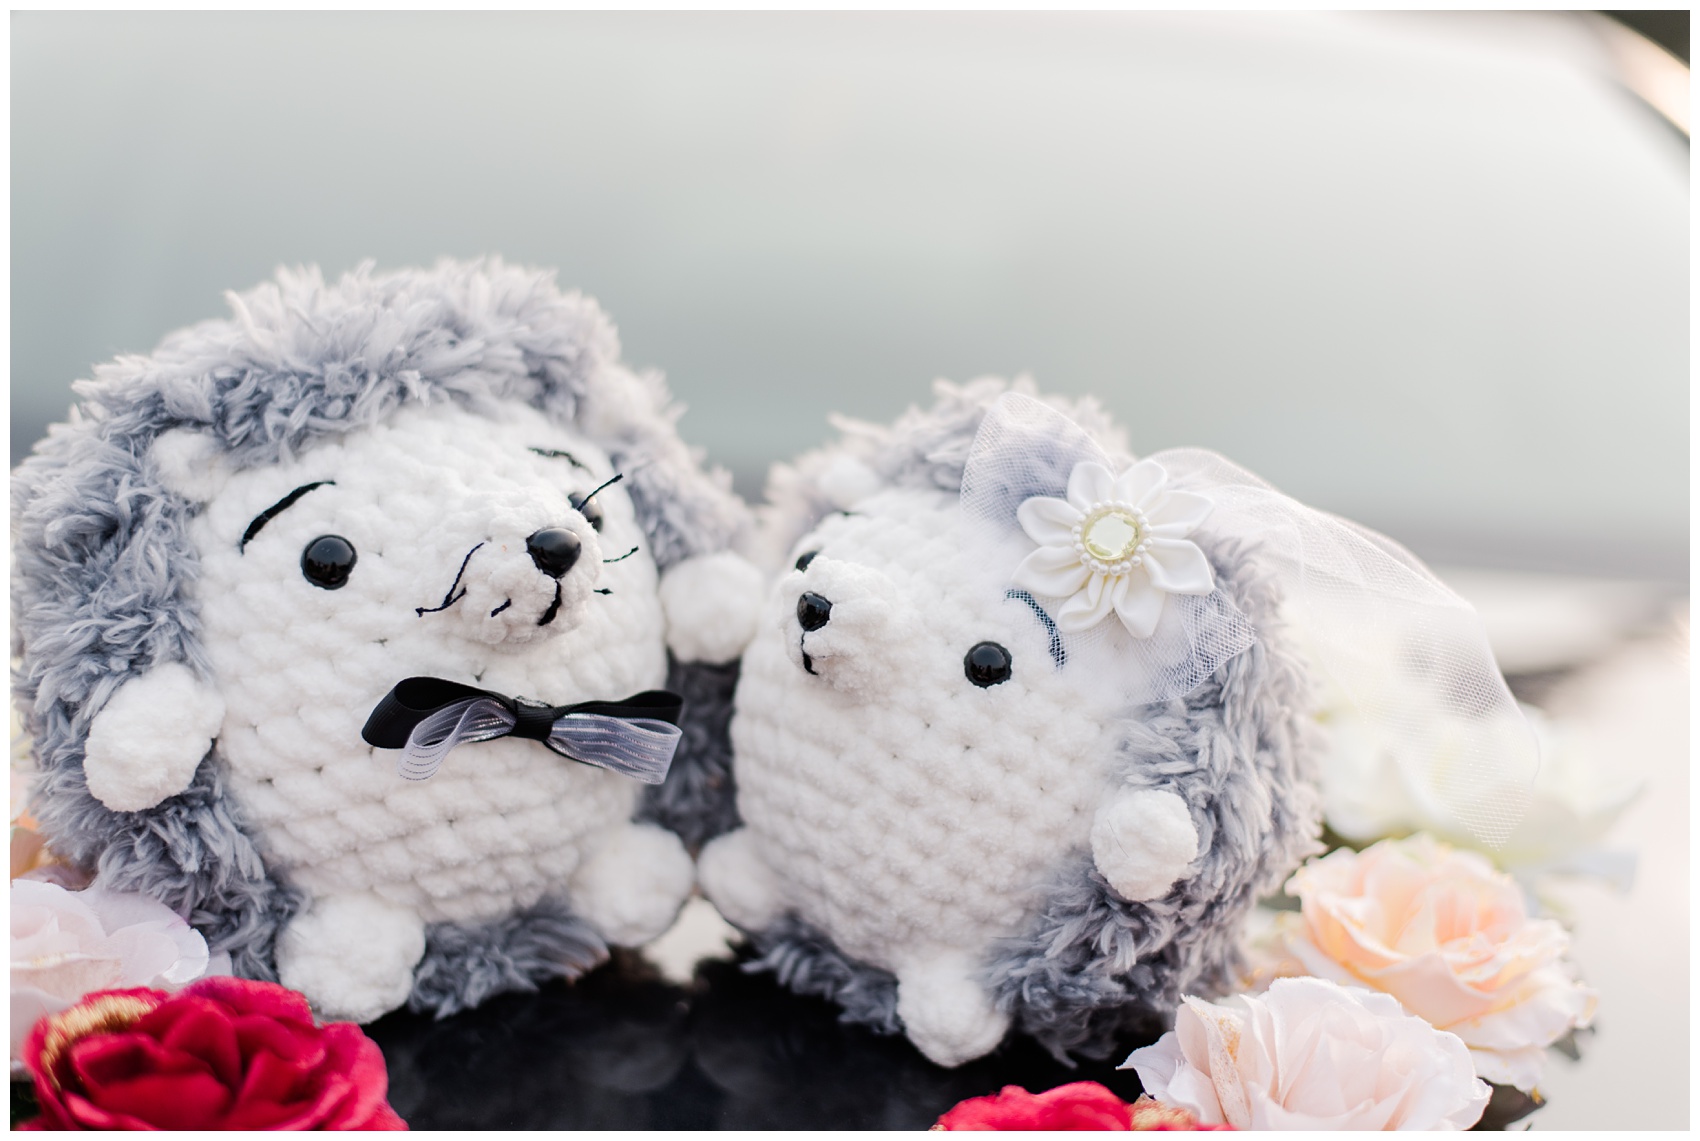 Two stuffed bride and groom wedding hedgehogs on a car in Coquitlam